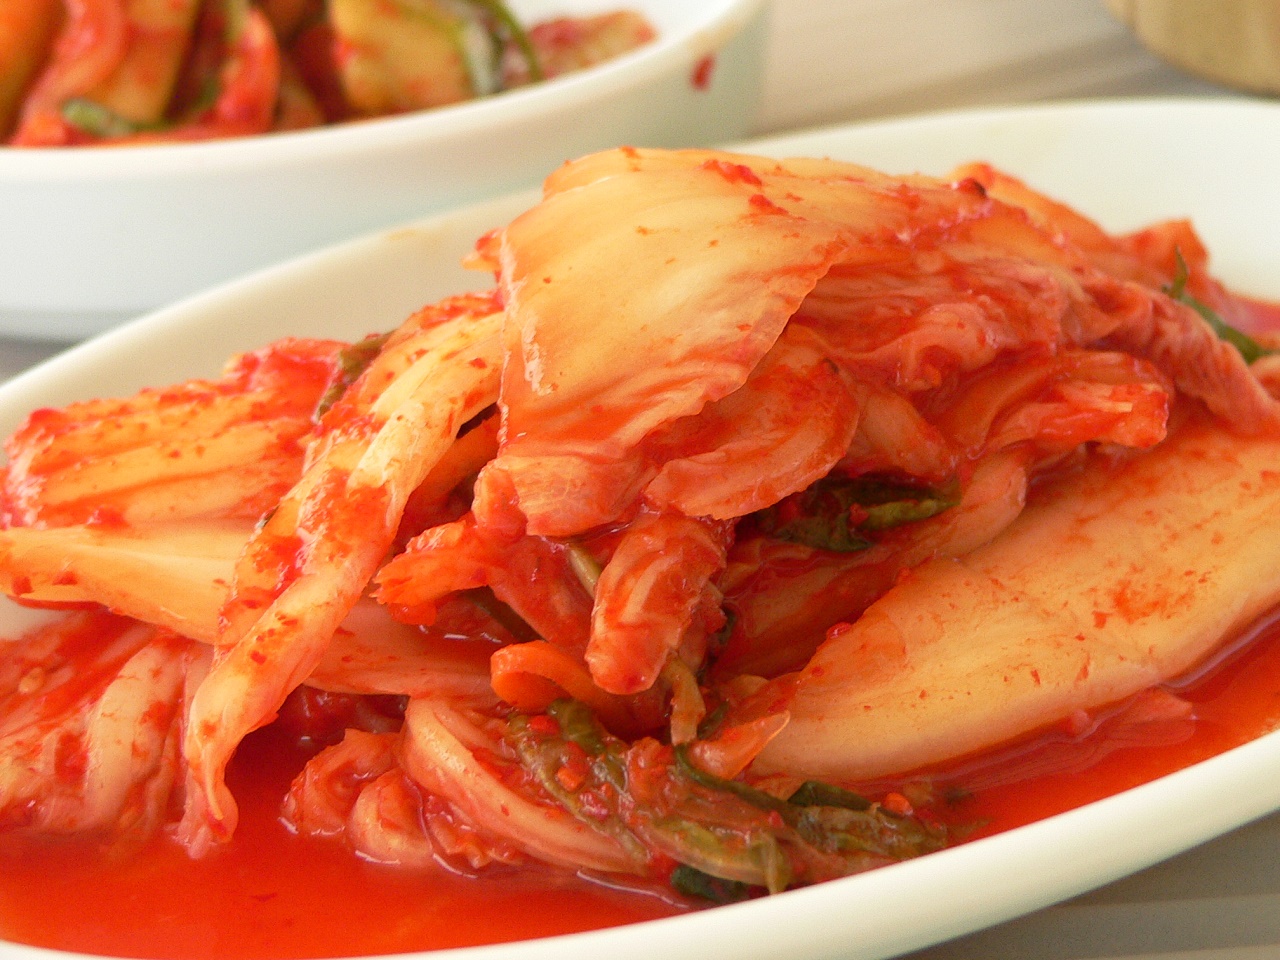 Kimchee or gimchi, is a traditional fermented Korean side dish made of vegetables with a variety of seasonings. Image credit: Craig Nagy / Flickr